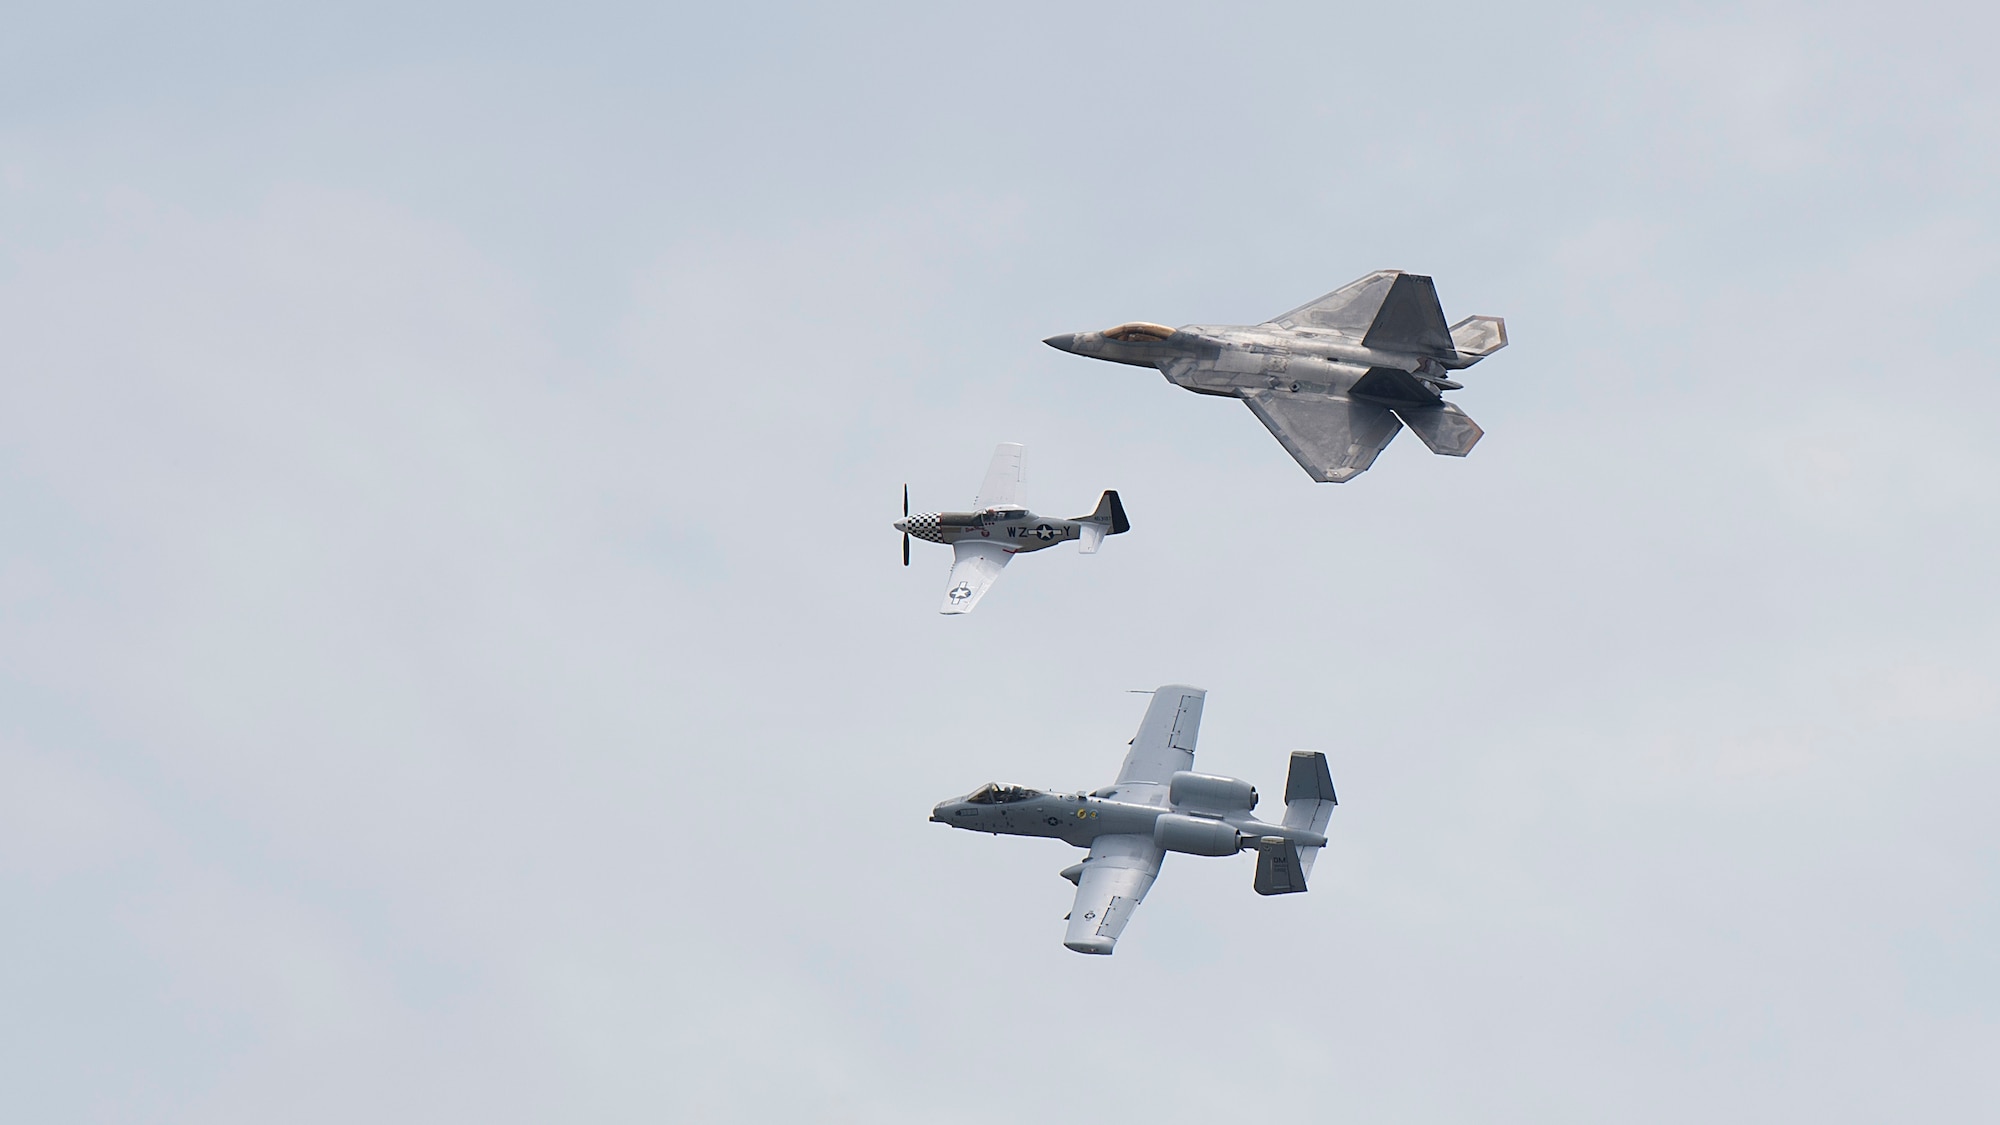 An A-10 Thunderbolt II (bottom), a P-51 Mustang (middle), and an F-22A Raptor (top), fly in formation during Tampa Bay AirFest 2018 hosted at MacDill Air Force Base, Fla., May 12-13, 2018. This heritage flight program presents the evolution of U.S. Air Force air power by flying today’s fighter aircraft next to vintage fighter aircraft.